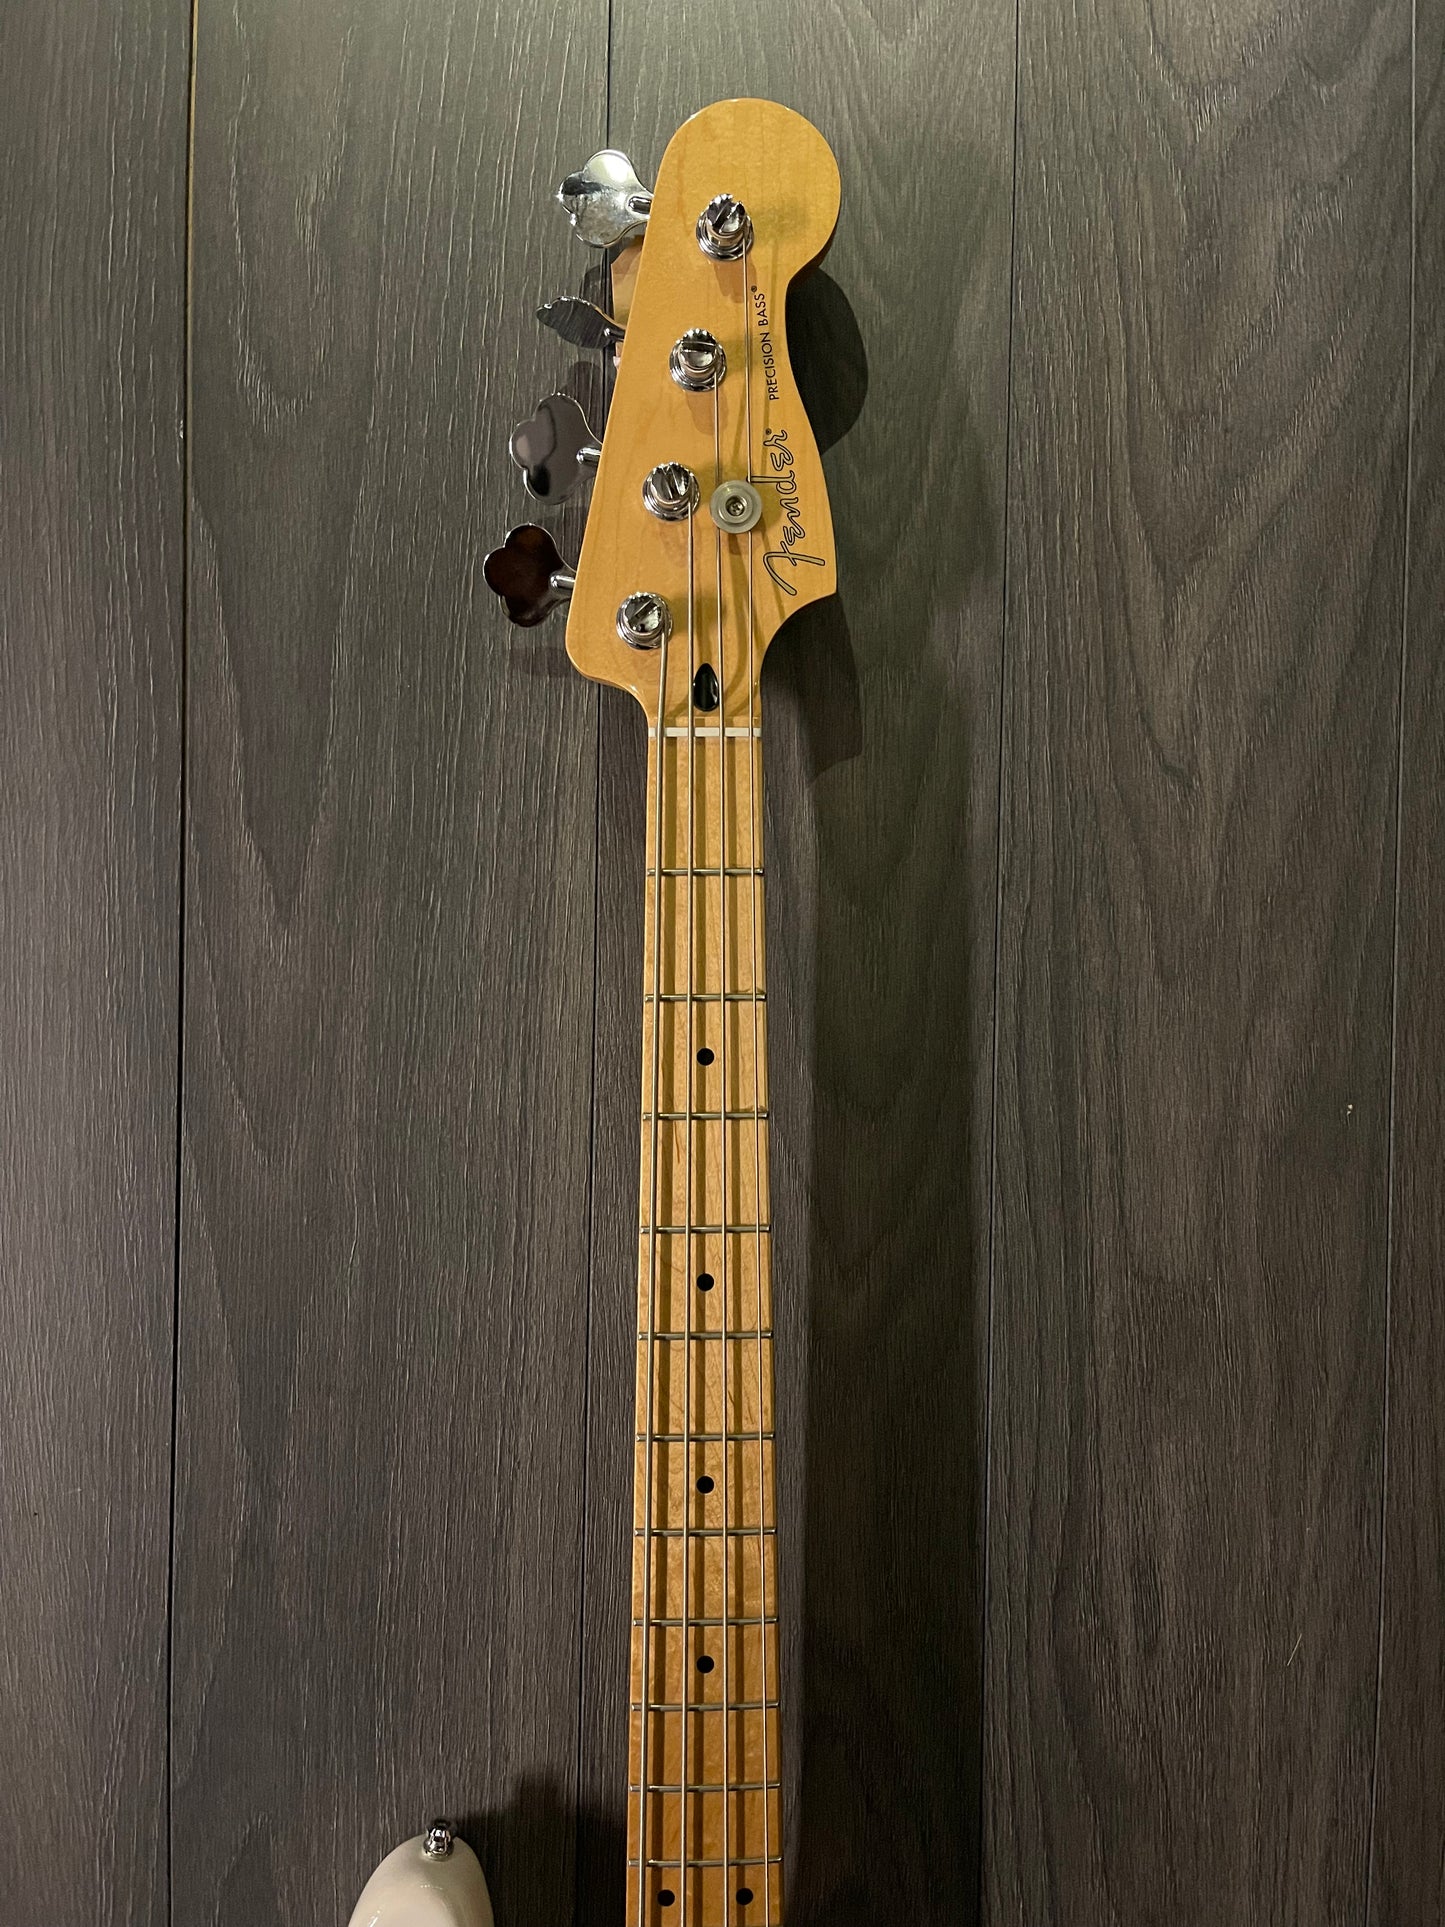 Fender Player Series Precision Bass Guitar (pre-owned)